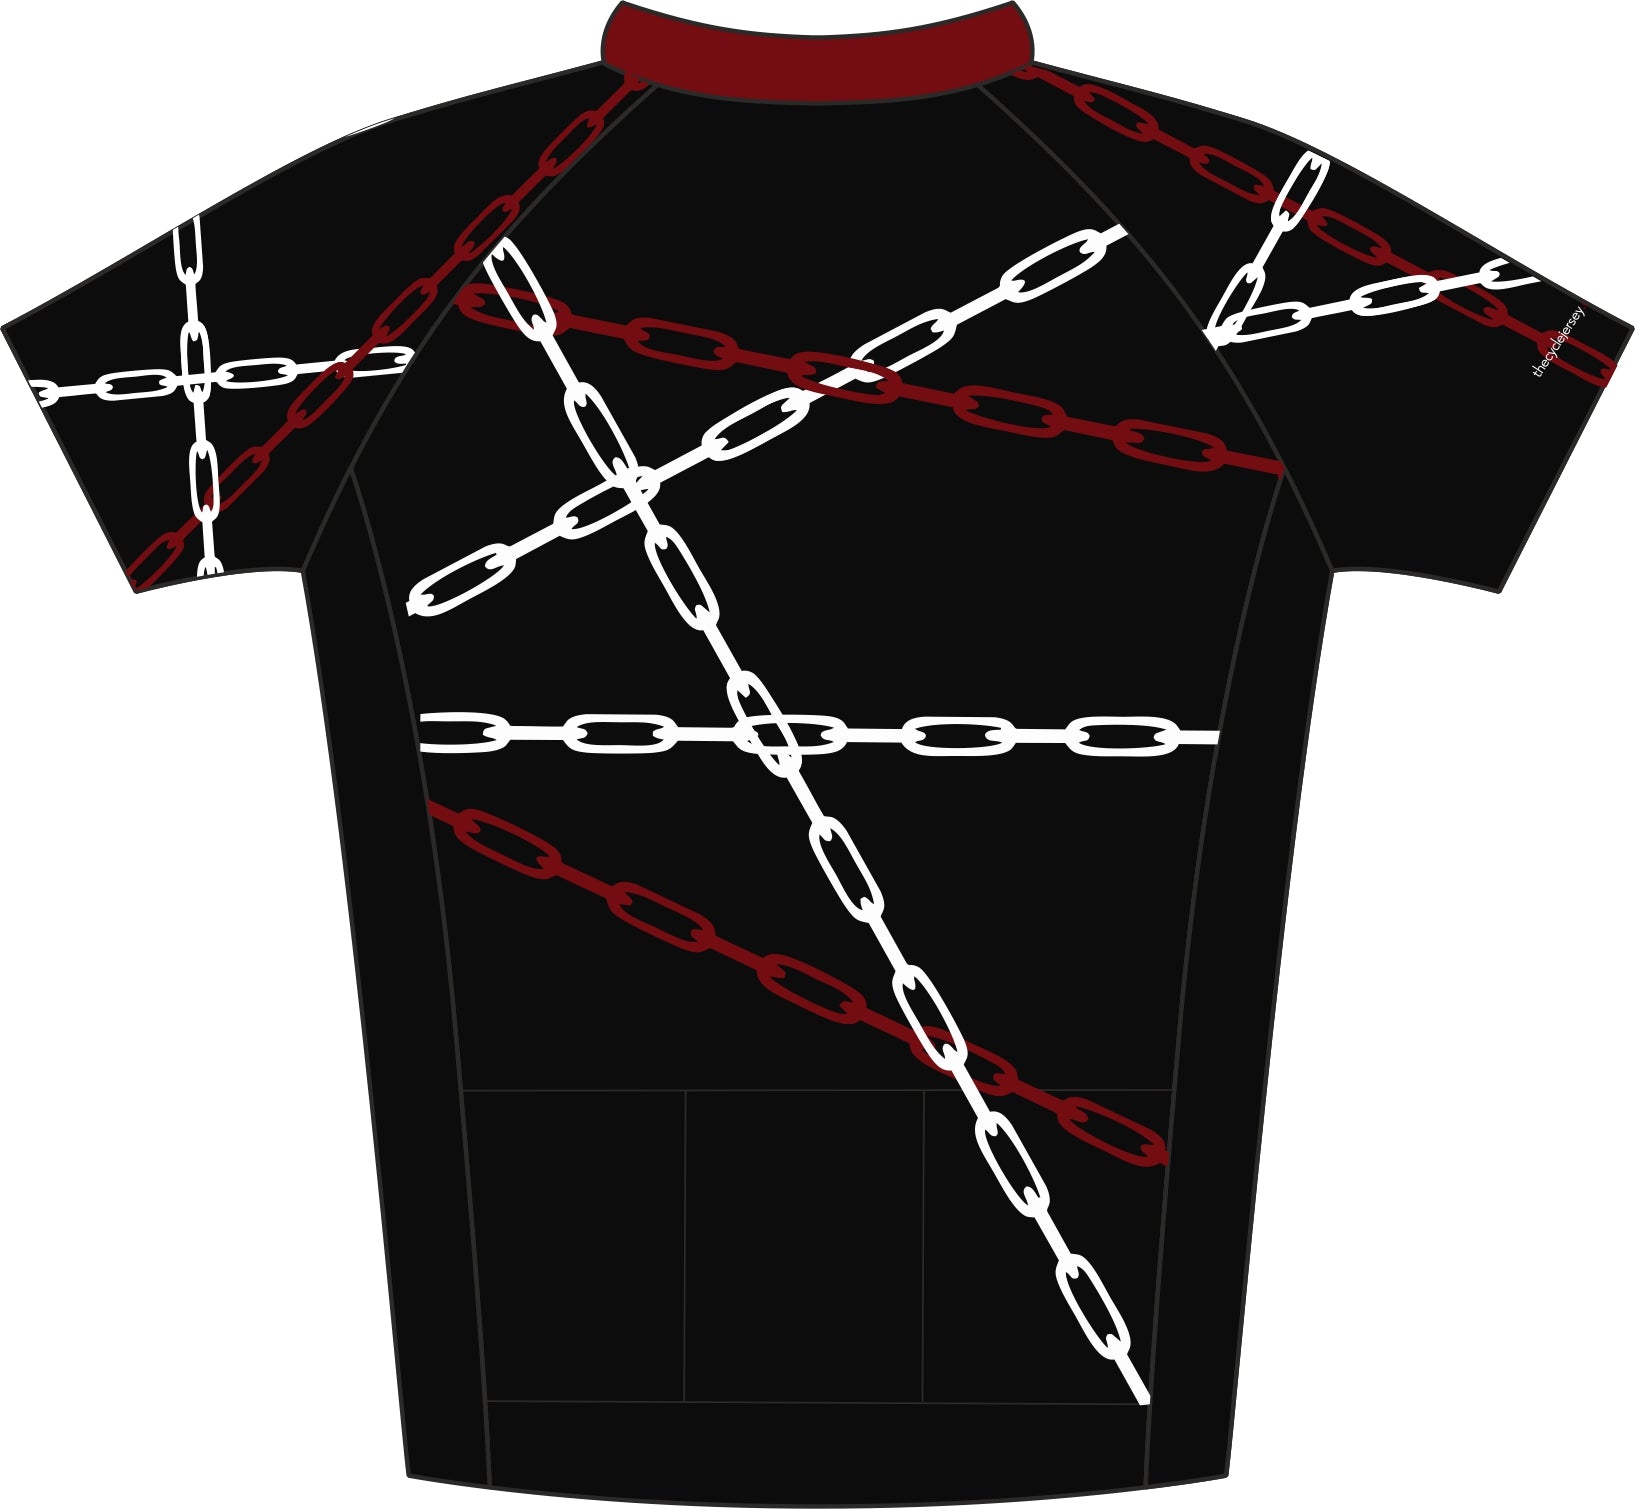 Tangled Chains Road Cycle Jersey Back